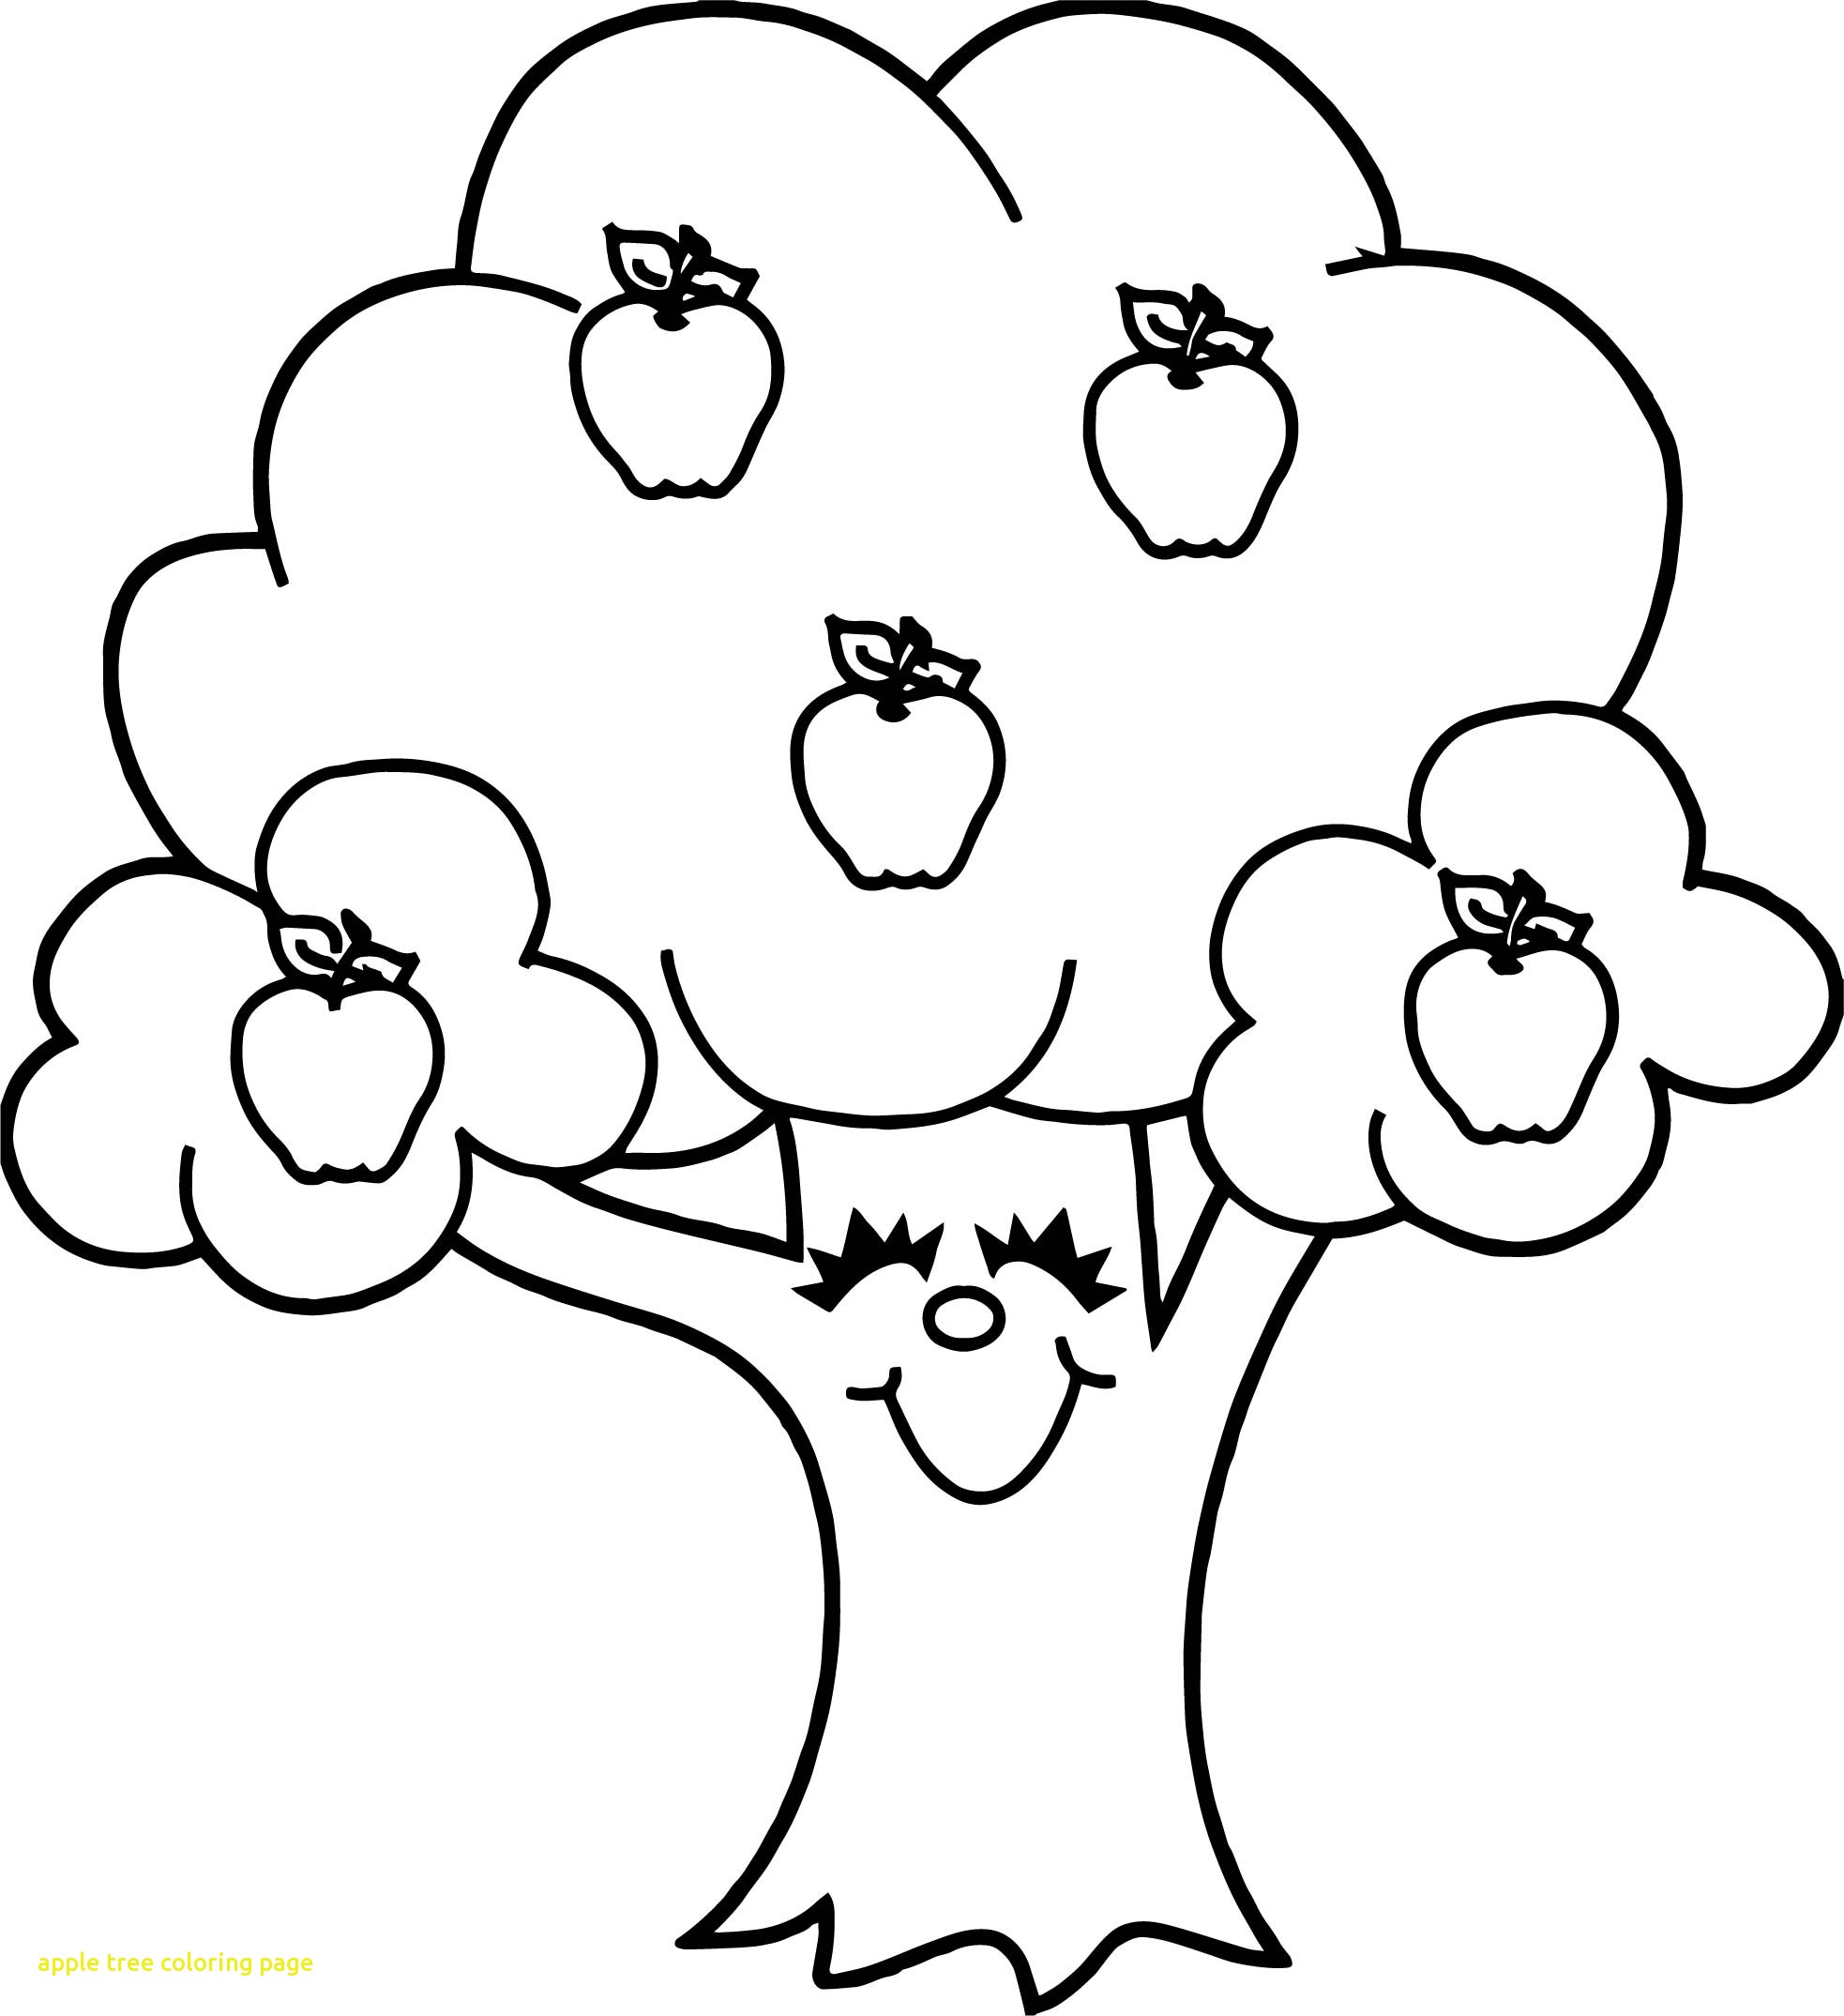 Download Cute Apple Tree Coloring Page - Free Printable Coloring ...